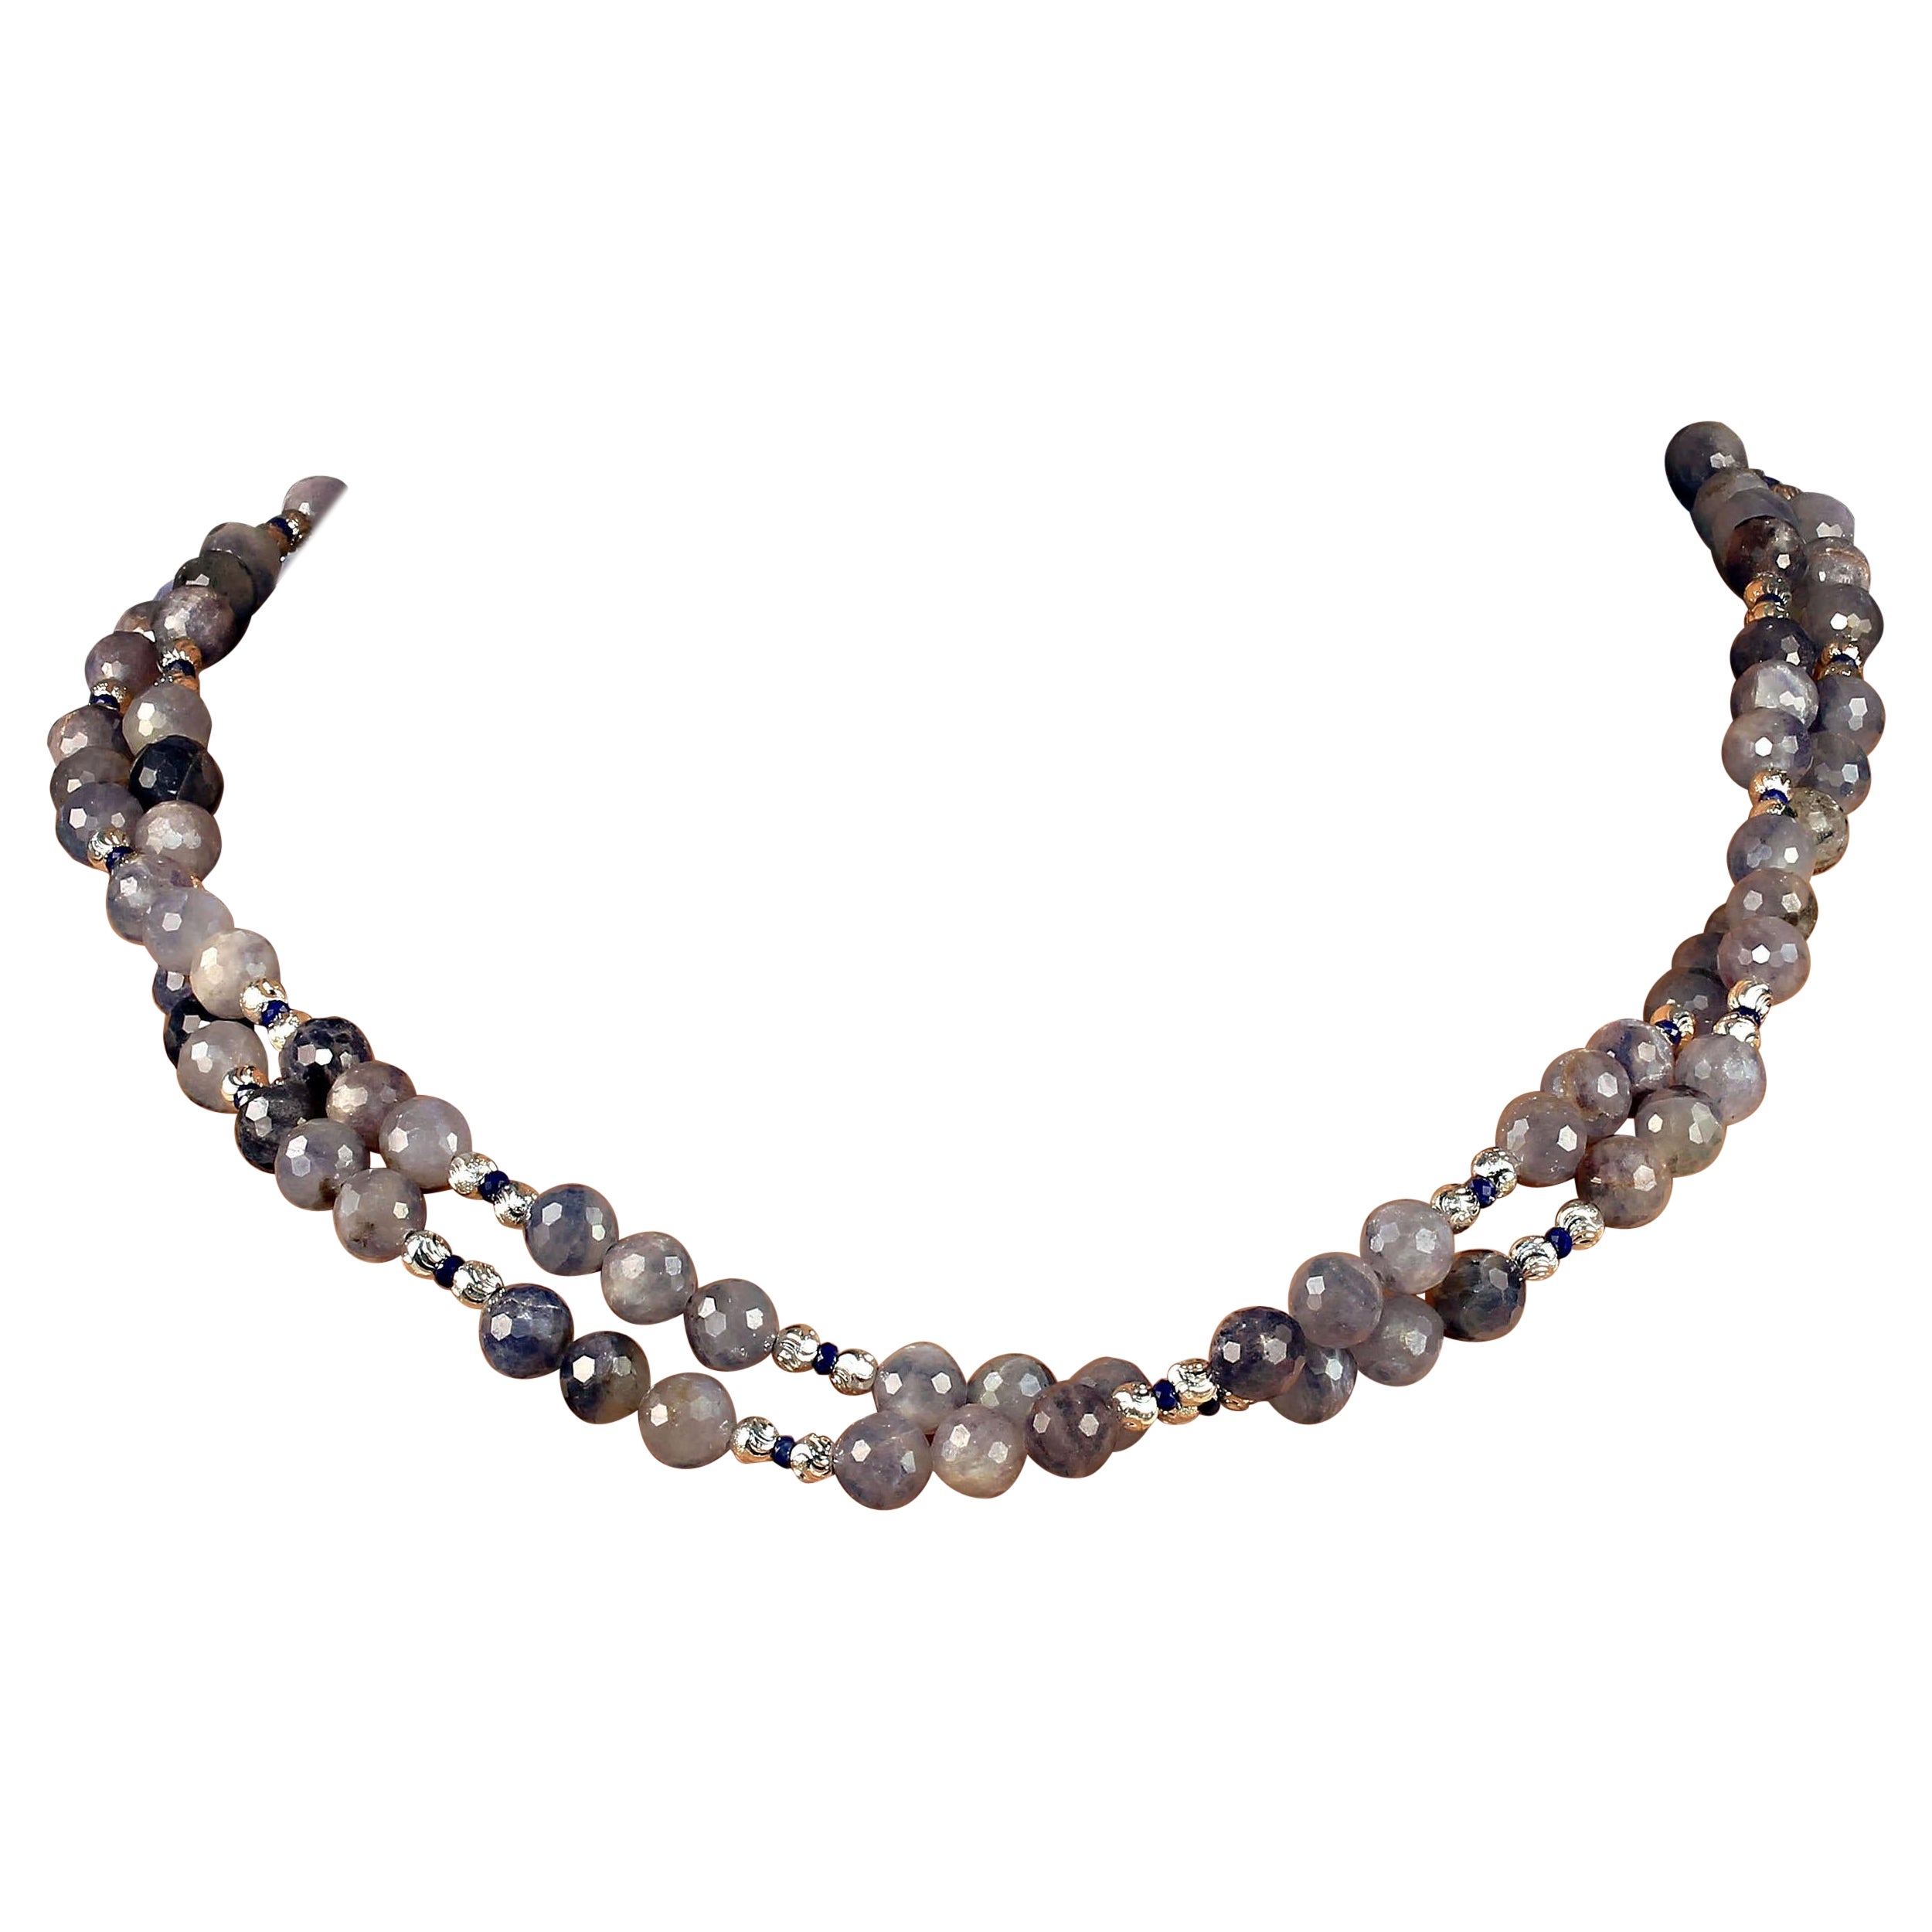 Artisan AJD 2 Strand Translucent Iolite 21 Inch necklace with Silver Accents  Great Gift For Sale